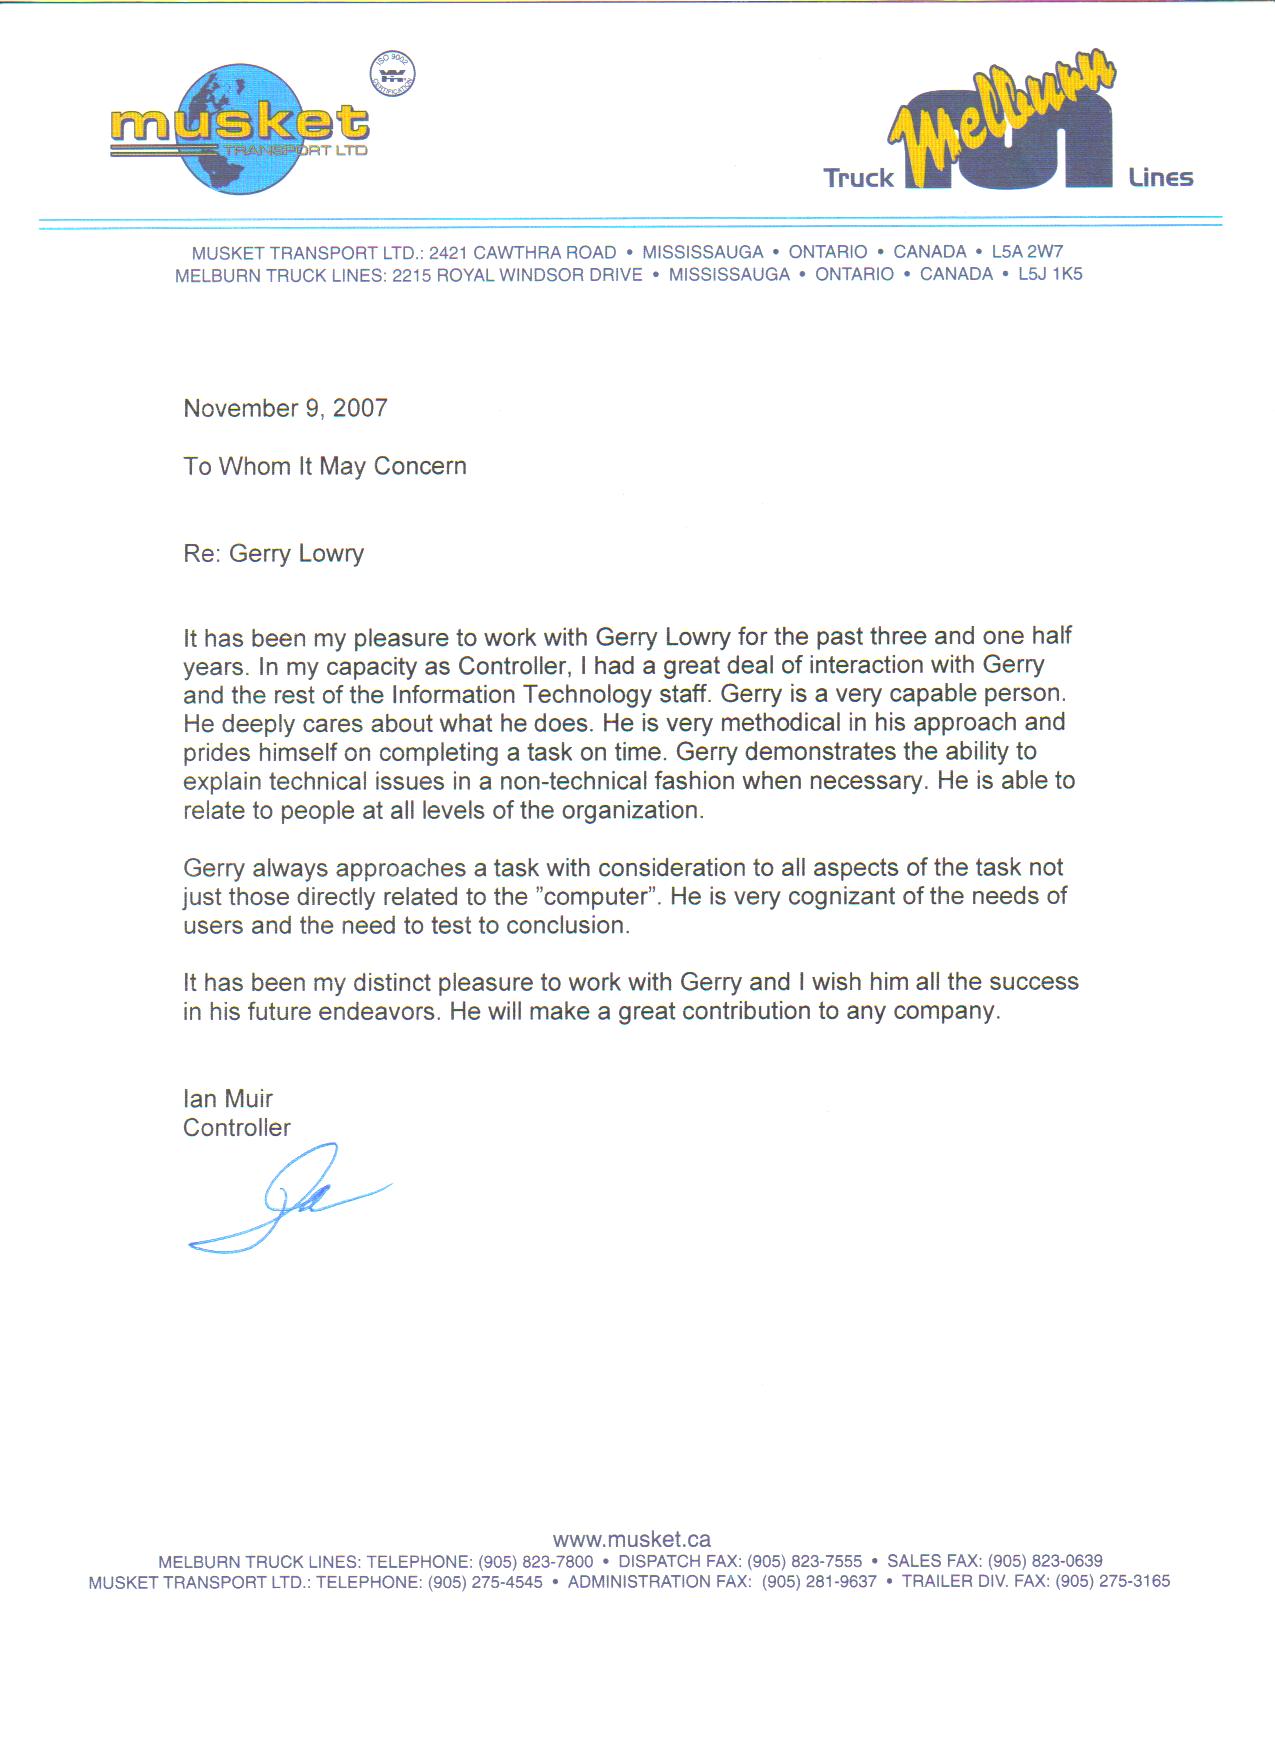 Testimonial Letter about Gerry Lowry by Ian Muir, Controller